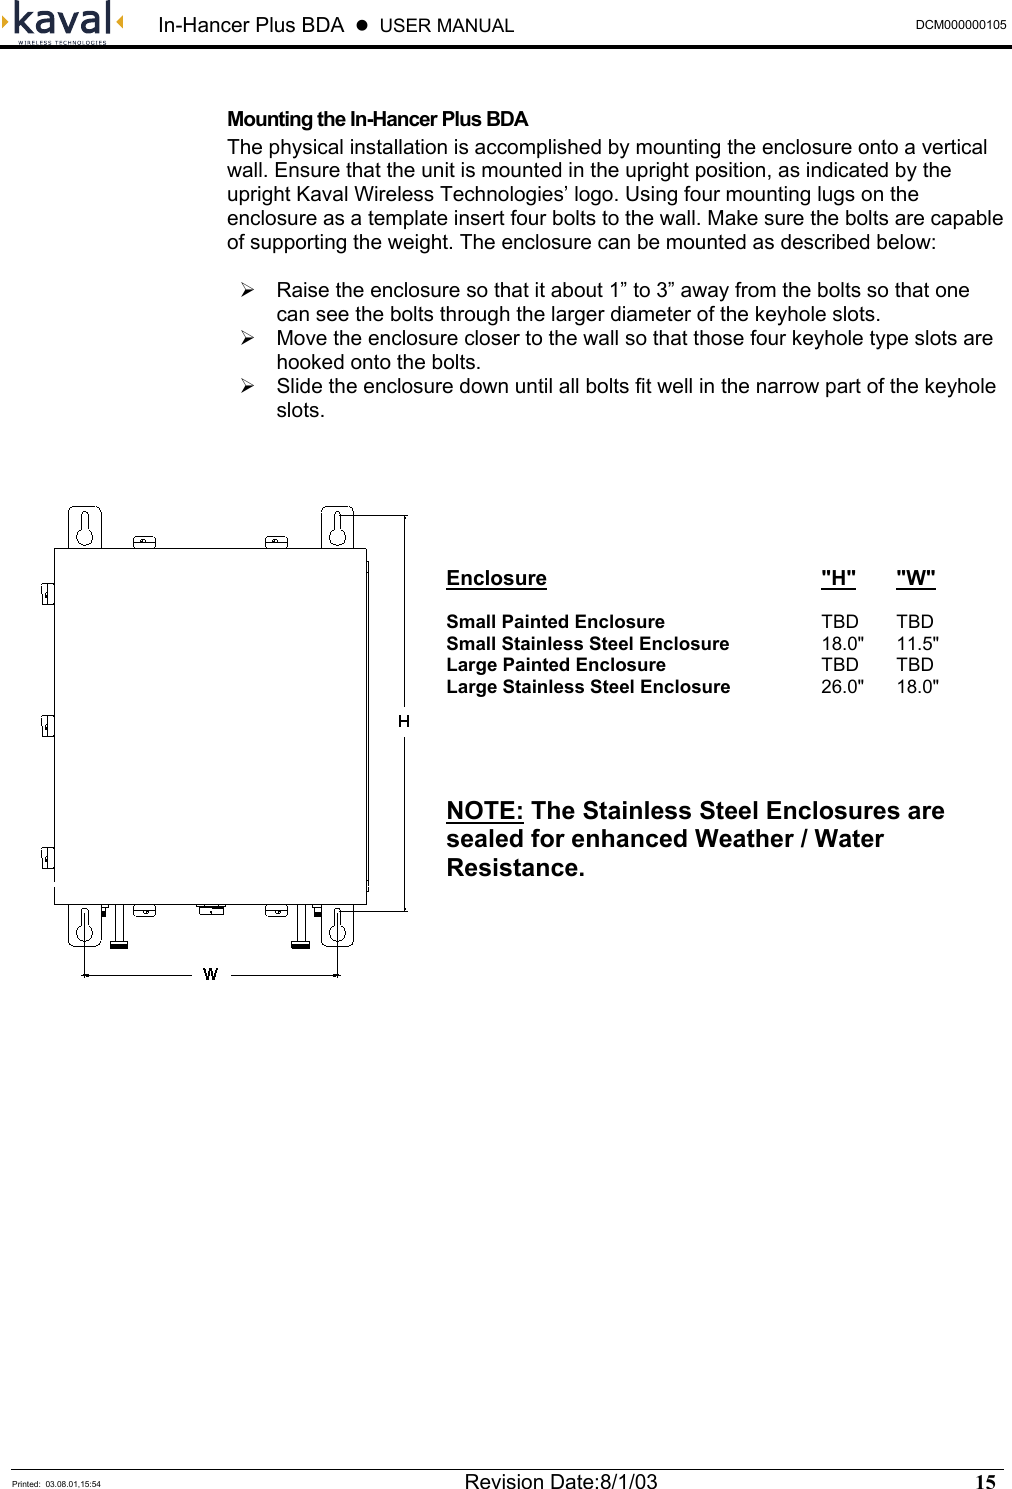  In-Hancer Plus BDA    USER MANUAL  DCM000000105  Printed:  03.08.01,15:54  Revision Date:8/1/03   15    Mounting the In-Hancer Plus BDA The physical installation is accomplished by mounting the enclosure onto a vertical wall. Ensure that the unit is mounted in the upright position, as indicated by the upright Kaval Wireless Technologies’ logo. Using four mounting lugs on the enclosure as a template insert four bolts to the wall. Make sure the bolts are capable of supporting the weight. The enclosure can be mounted as described below:   Raise the enclosure so that it about 1” to 3” away from the bolts so that one can see the bolts through the larger diameter of the keyhole slots.  Move the enclosure closer to the wall so that those four keyhole type slots are hooked onto the bolts.  Slide the enclosure down until all bolts fit well in the narrow part of the keyhole slots.       Enclosure    &quot;H&quot; &quot;W&quot;  Small Painted Enclosure   TBD TBD Small Stainless Steel Enclosure   18.0&quot;  11.5&quot; Large Painted Enclosure   TBD TBD Large Stainless Steel Enclosure   26.0&quot;  18.0&quot;   NOTE: The Stainless Steel Enclosures are sealed for enhanced Weather / Water Resistance. 